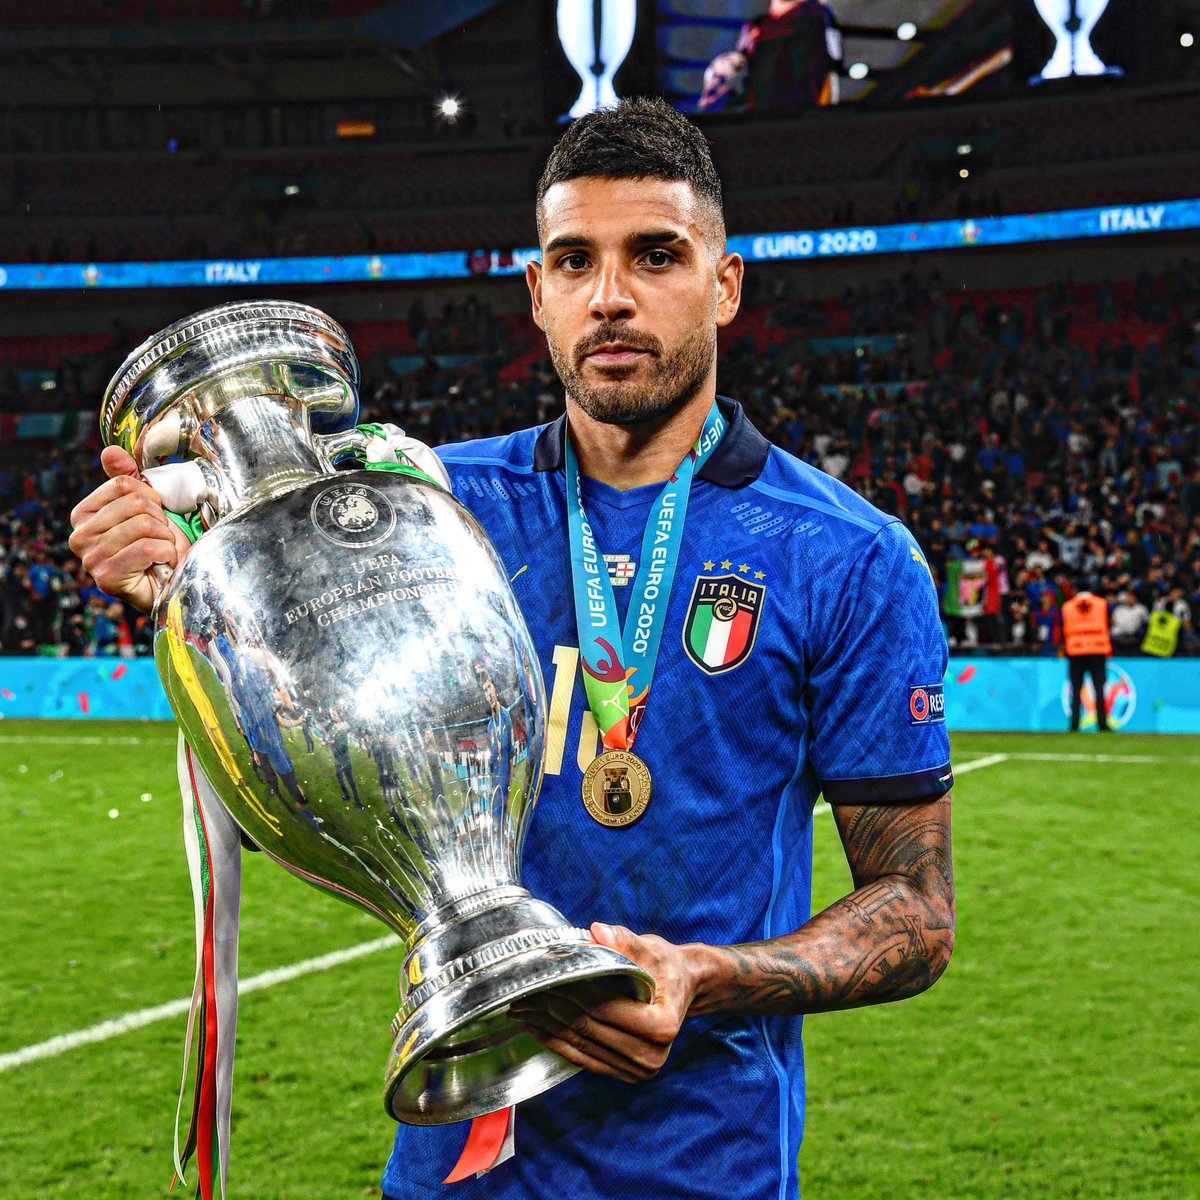 …and here’s first player ever to win all five UEFA competitions ✨

🏆 Champions League 2021
🏆 Europa League 2019
🏆 Conference League 2023
🏆 Super Cup 2021
🏆 EURO 2020 

Emerson Palmieri 🎩